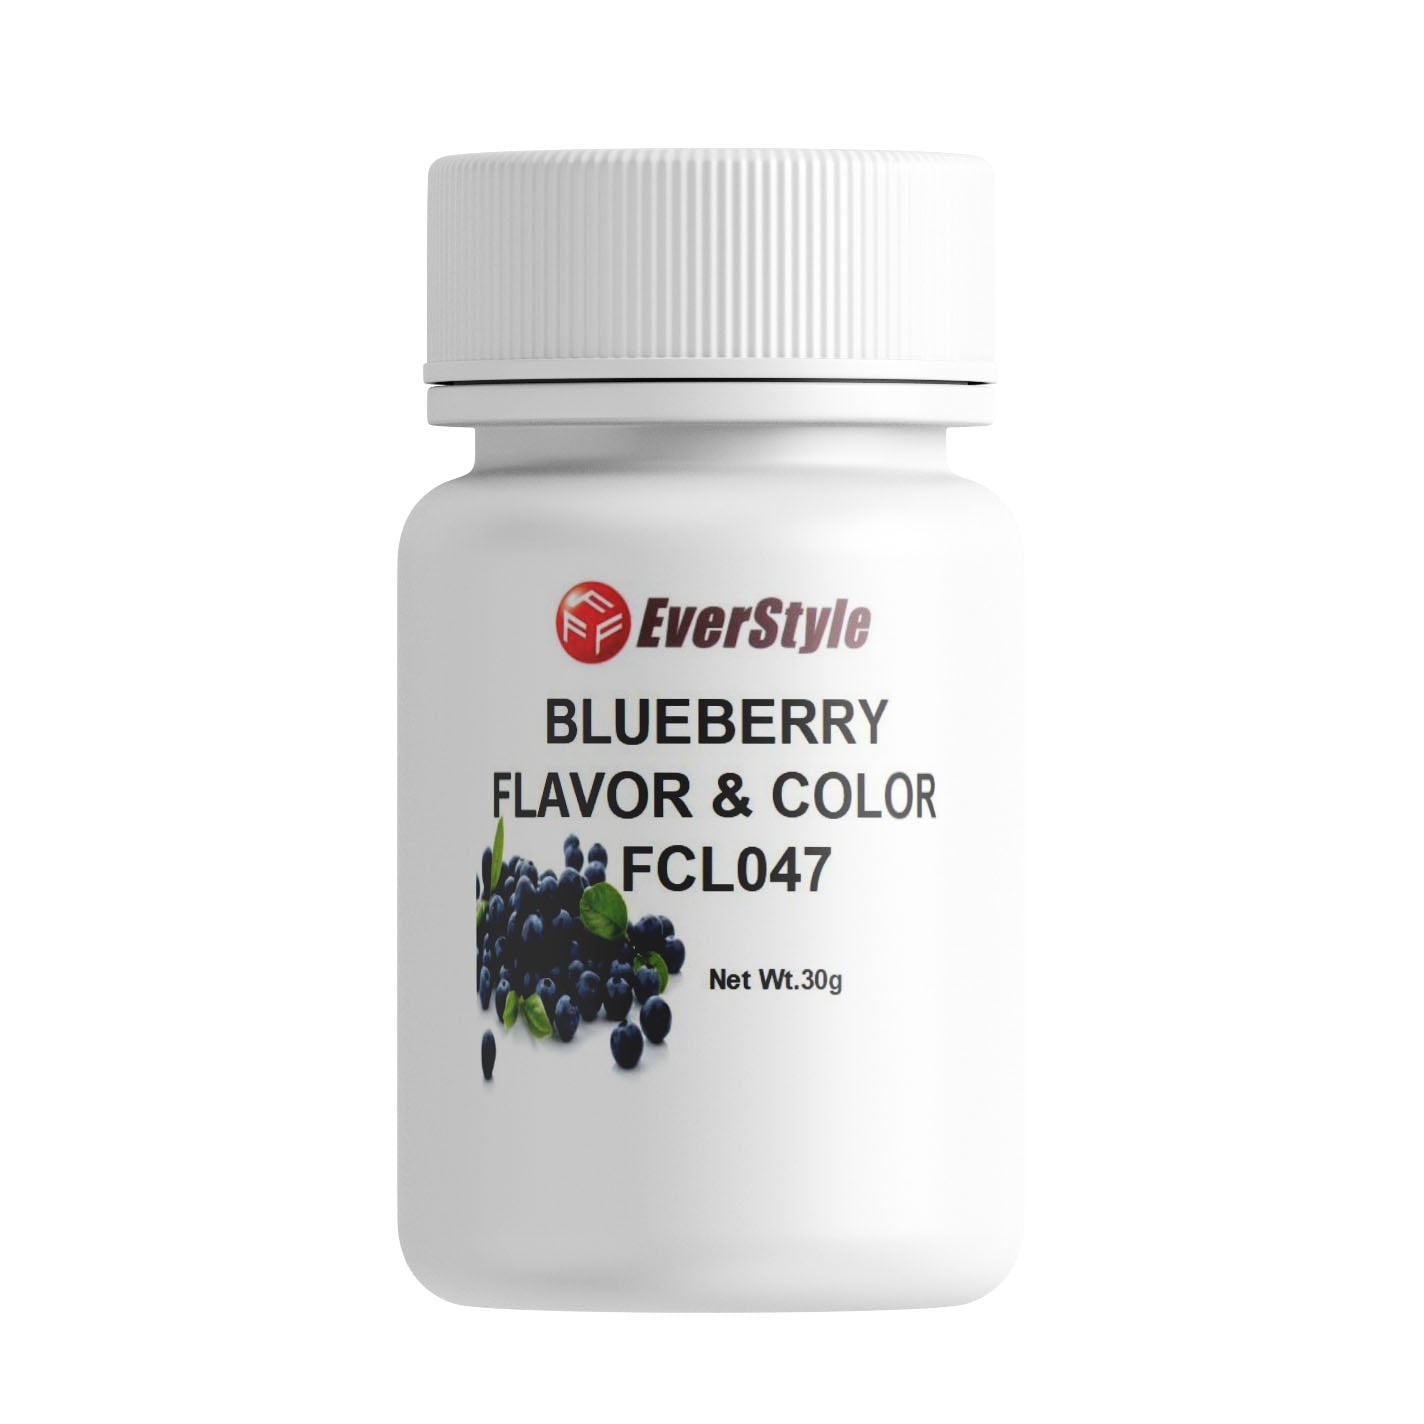 Everstyle Blueberry Flavor and Color 30g (FCL047)